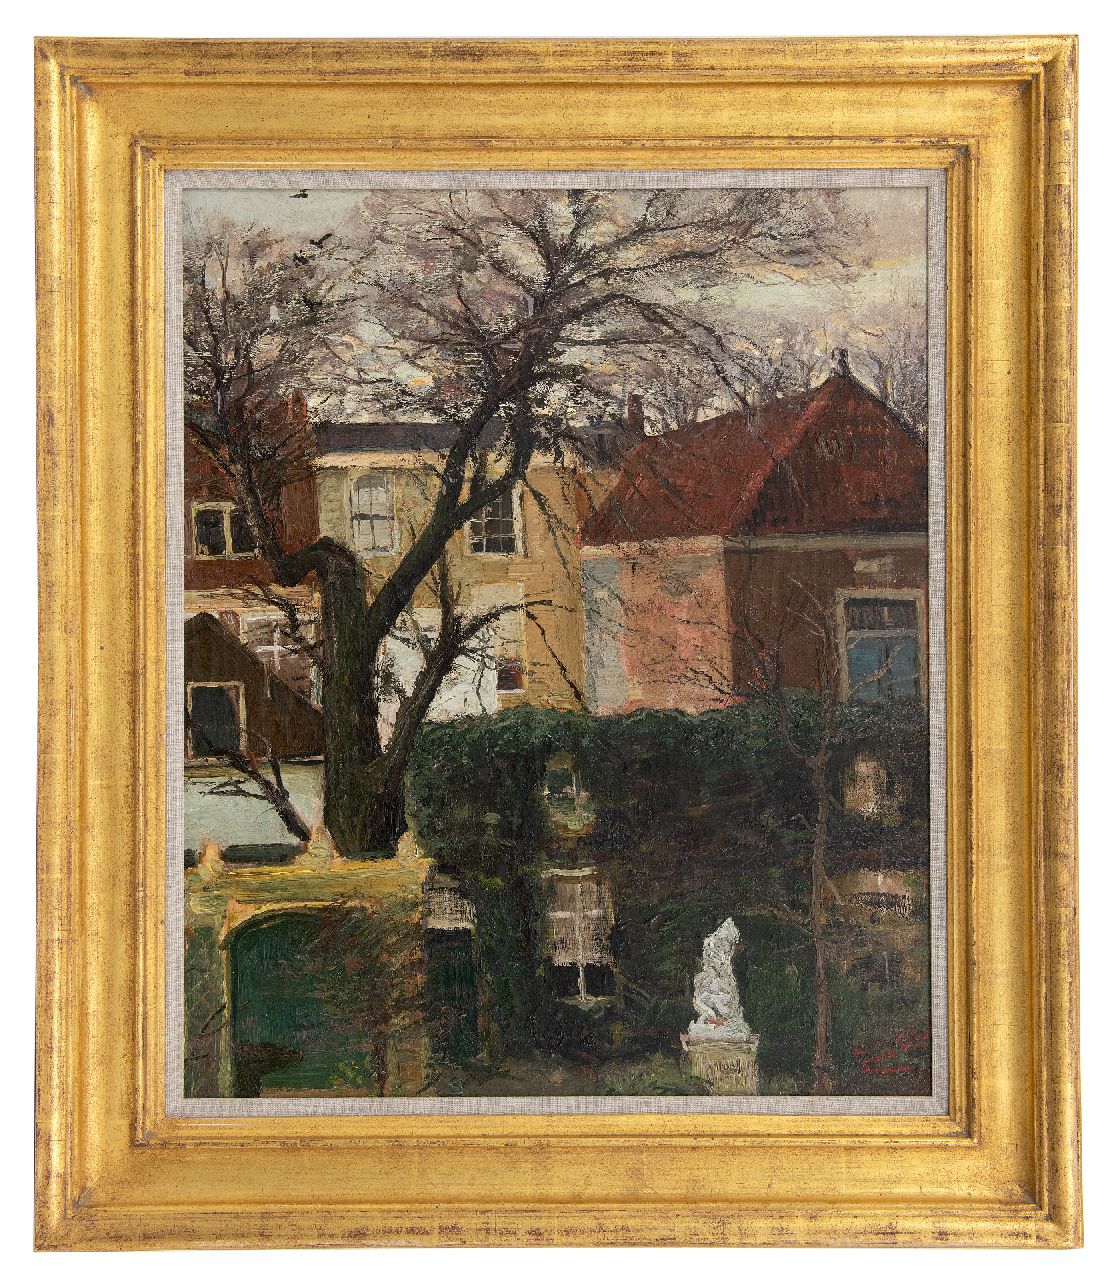 Apol L.F.H.  | Lodewijk Franciscus Hendrik 'Louis' Apol, A view of gardens and houses, possibly the Juffrouw Idastraat, The Hague, oil on canvas 60.6 x 50.4 cm, signed l.r.